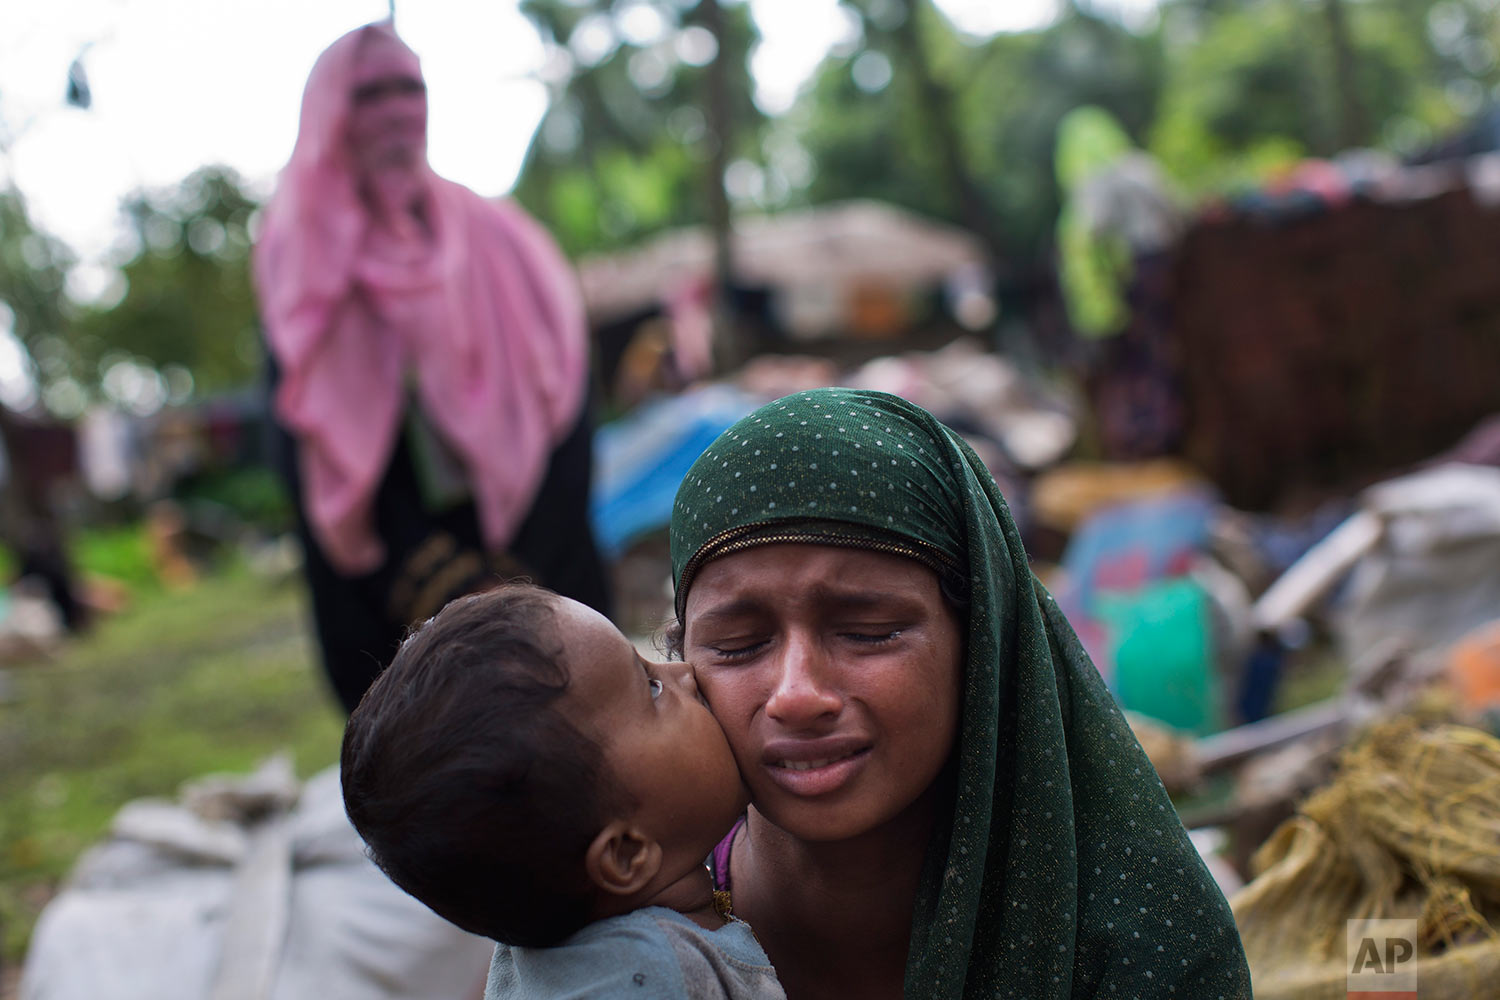 A Rohingya Muslim child places a kiss on his mother's cheek as they rest after having crossed over from Myanmar to the Bangladesh side of the border near Cox's Bazar's Teknaf area, Saturday, Sept. 2, 2017. (AP Photo/Bernat Armangue)